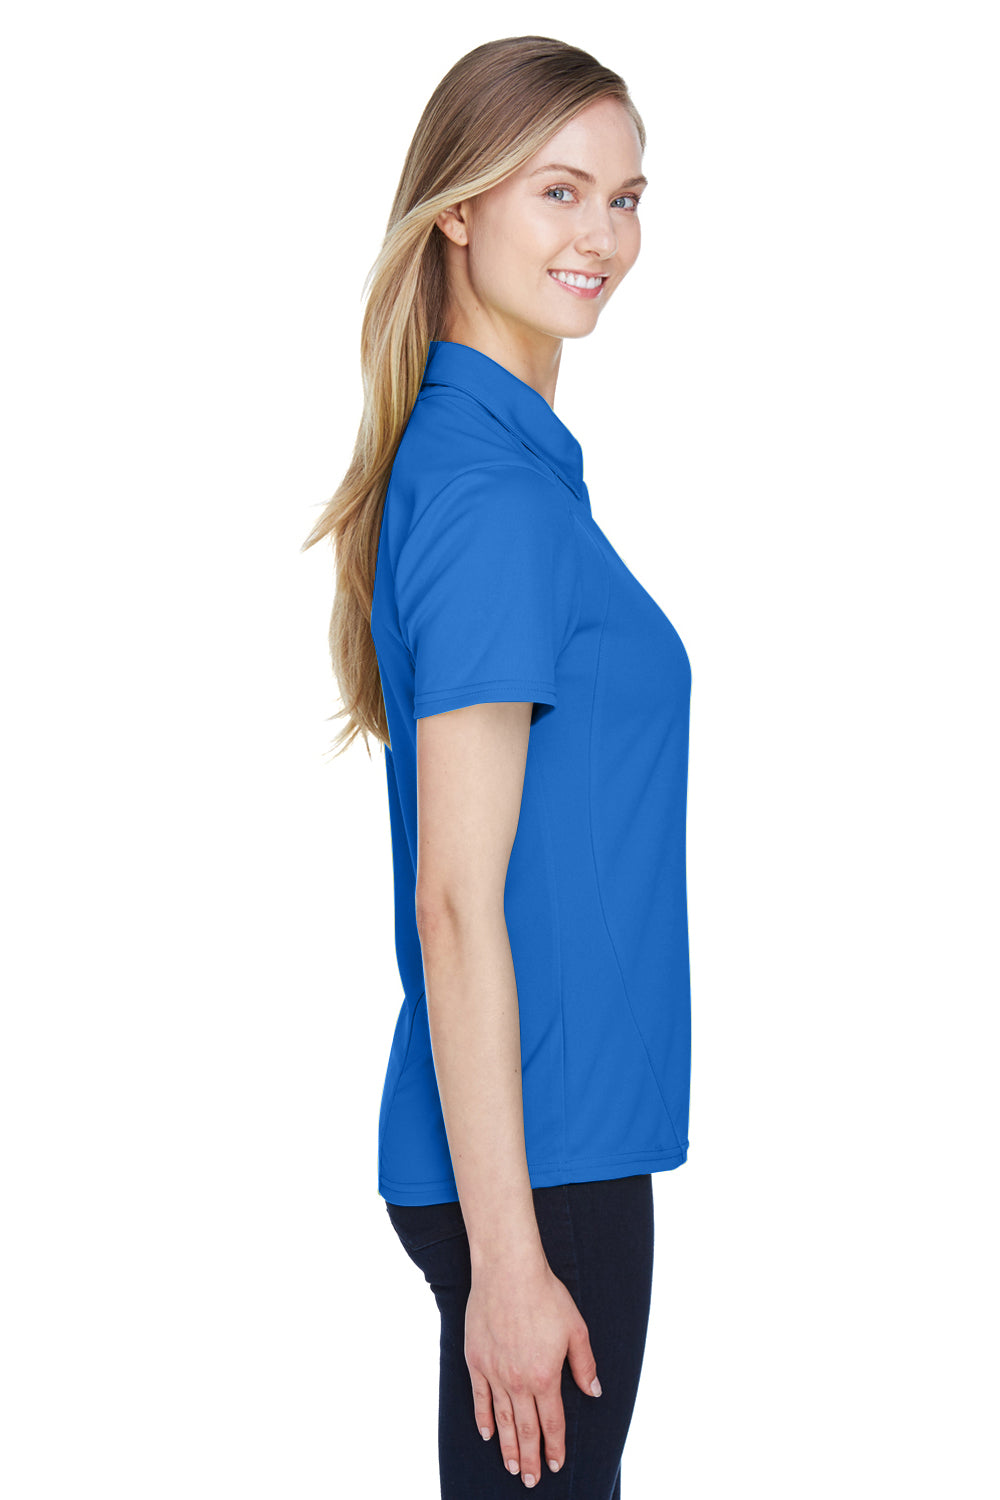 North End 78632 Womens Sport Red Performance Moisture Wicking Short Sleeve Polo Shirt Nautical Blue Side